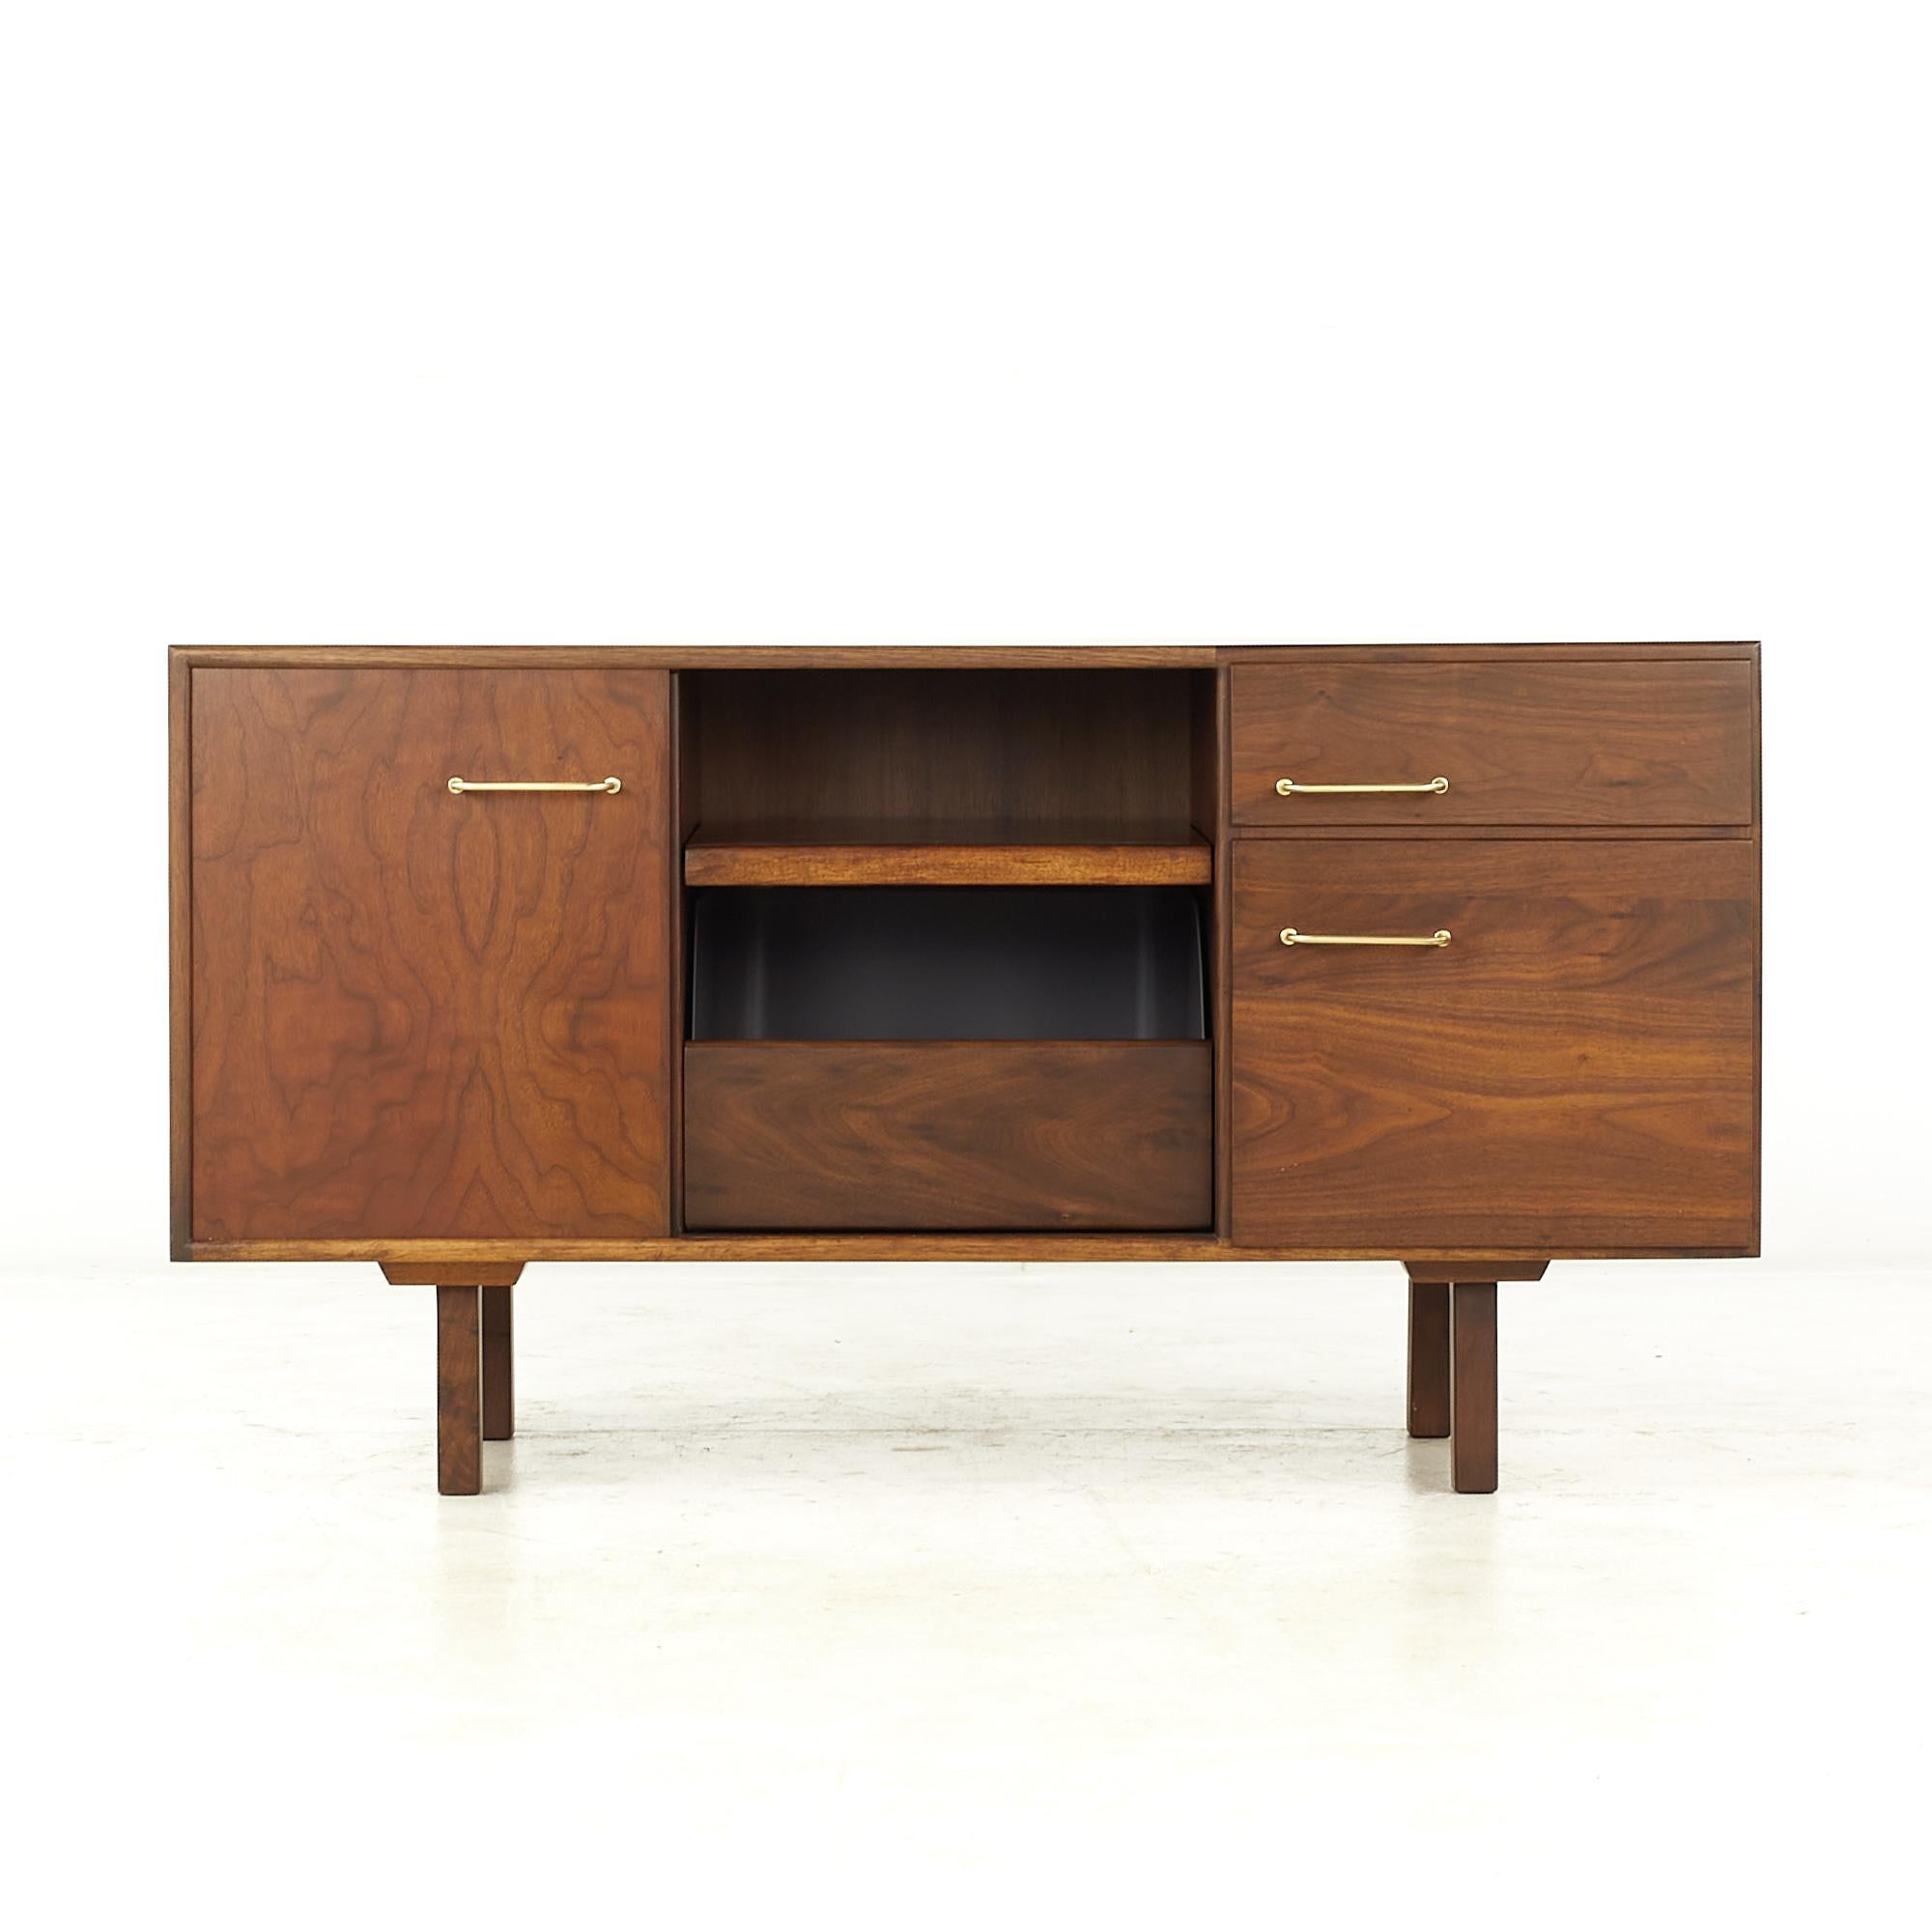 Jens Risom Mid Century Walnut and Brass Media Cabinet

This cabinet measures: 48 wide x 20 deep x 26 high

All pieces of furniture can be had in what we call restored vintage condition. That means the piece is restored upon purchase so it’s free of